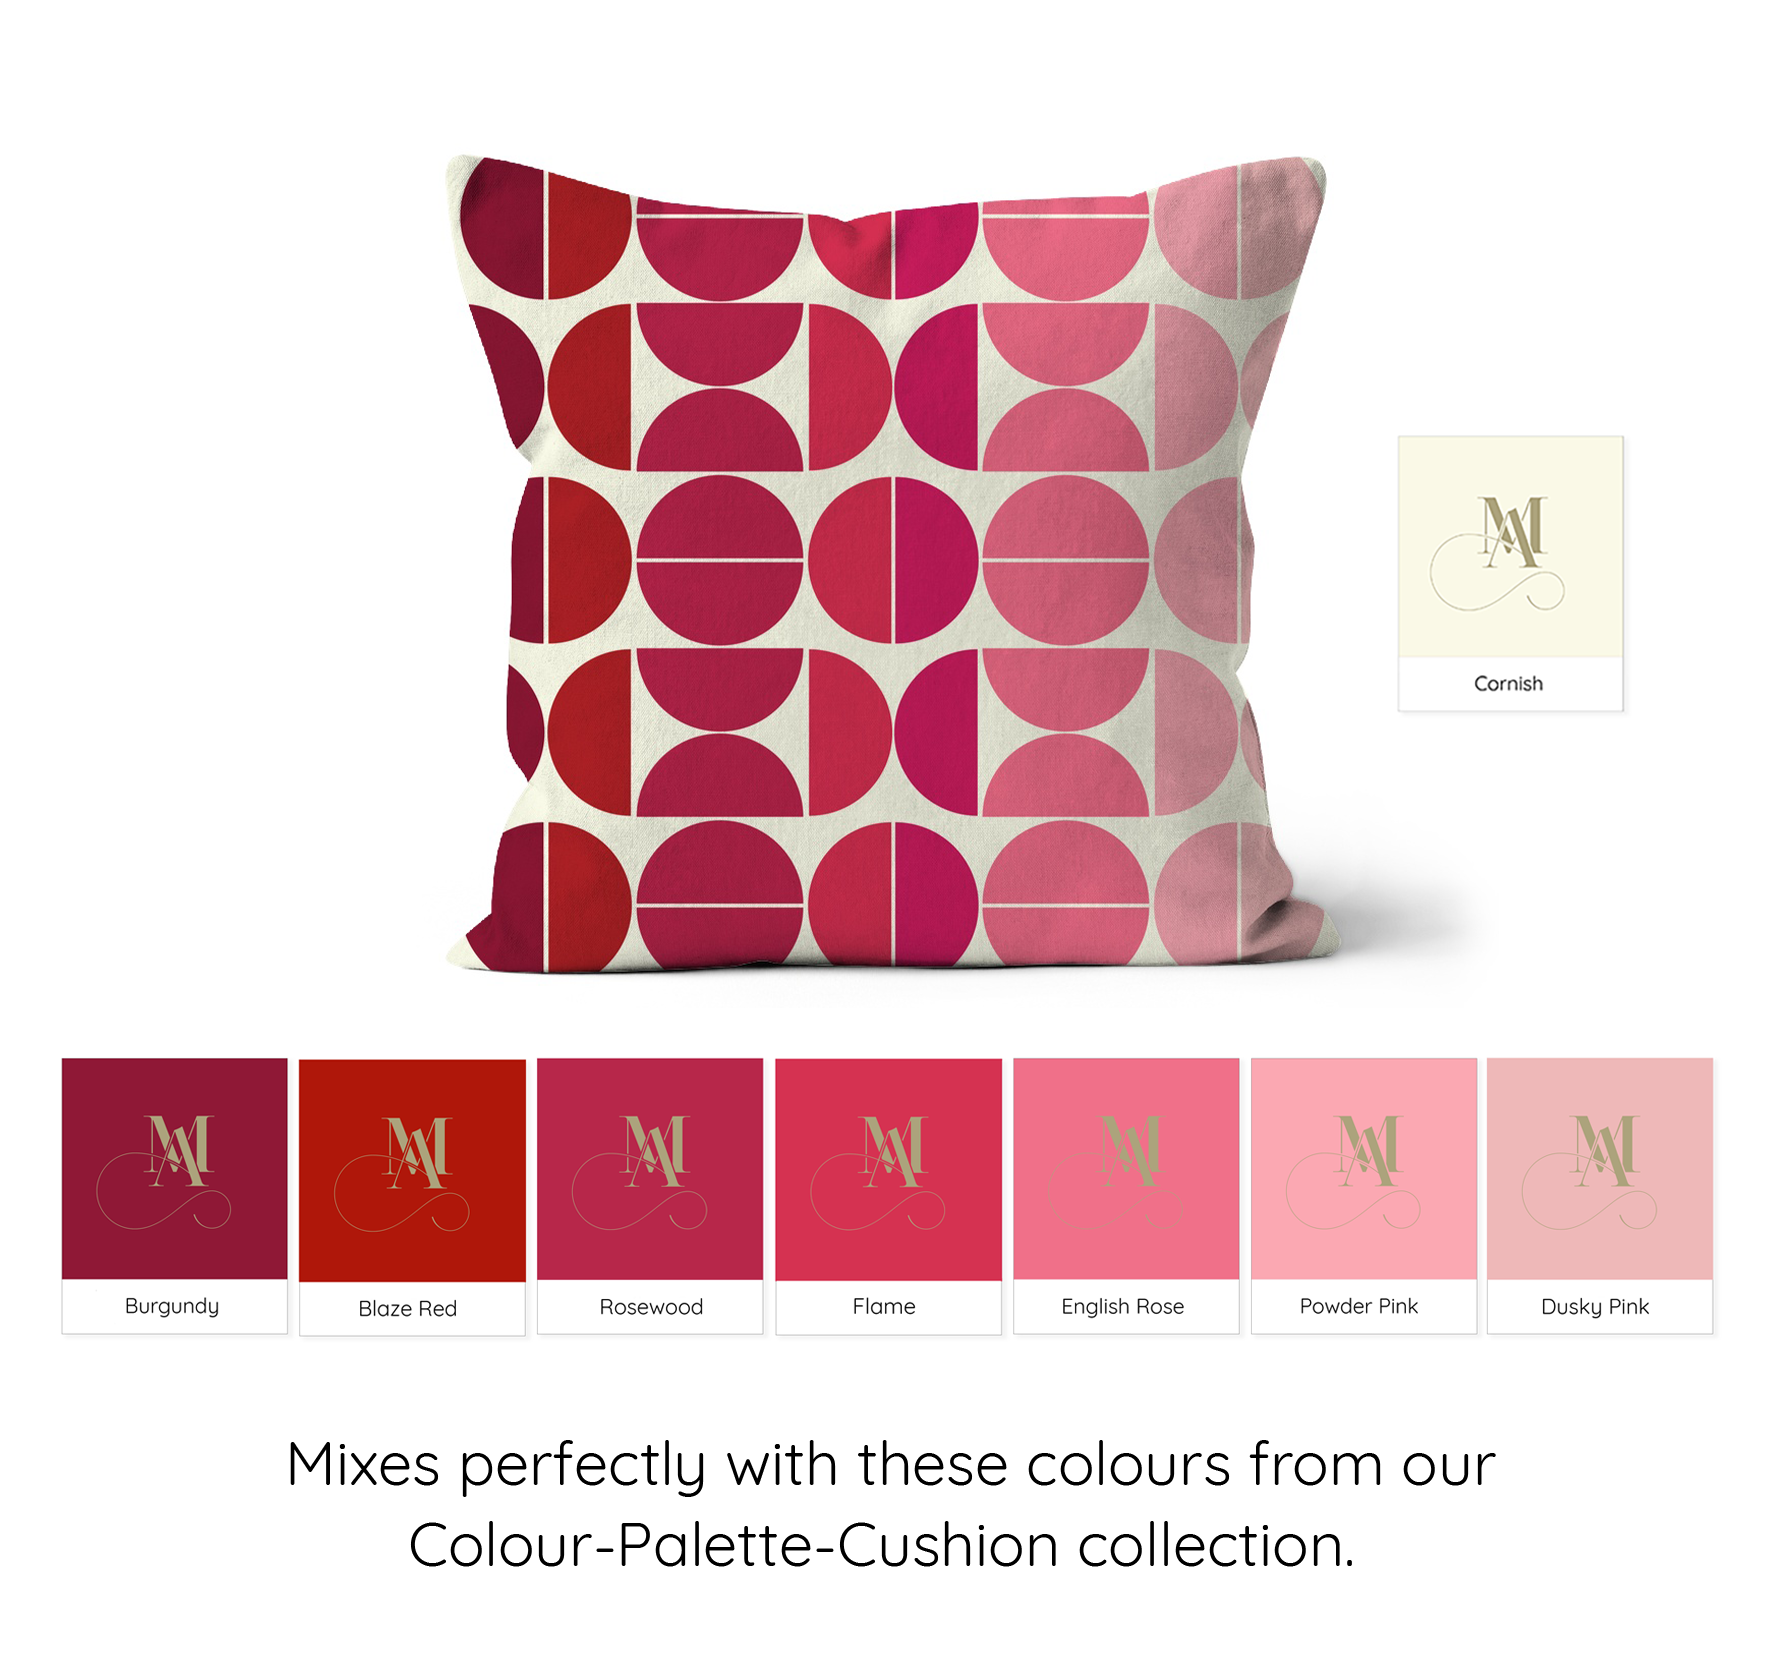 Square shaped cushion with Bauhaus style graphic pattern in graduating shades of pink. Colour swatches of all the colours used.